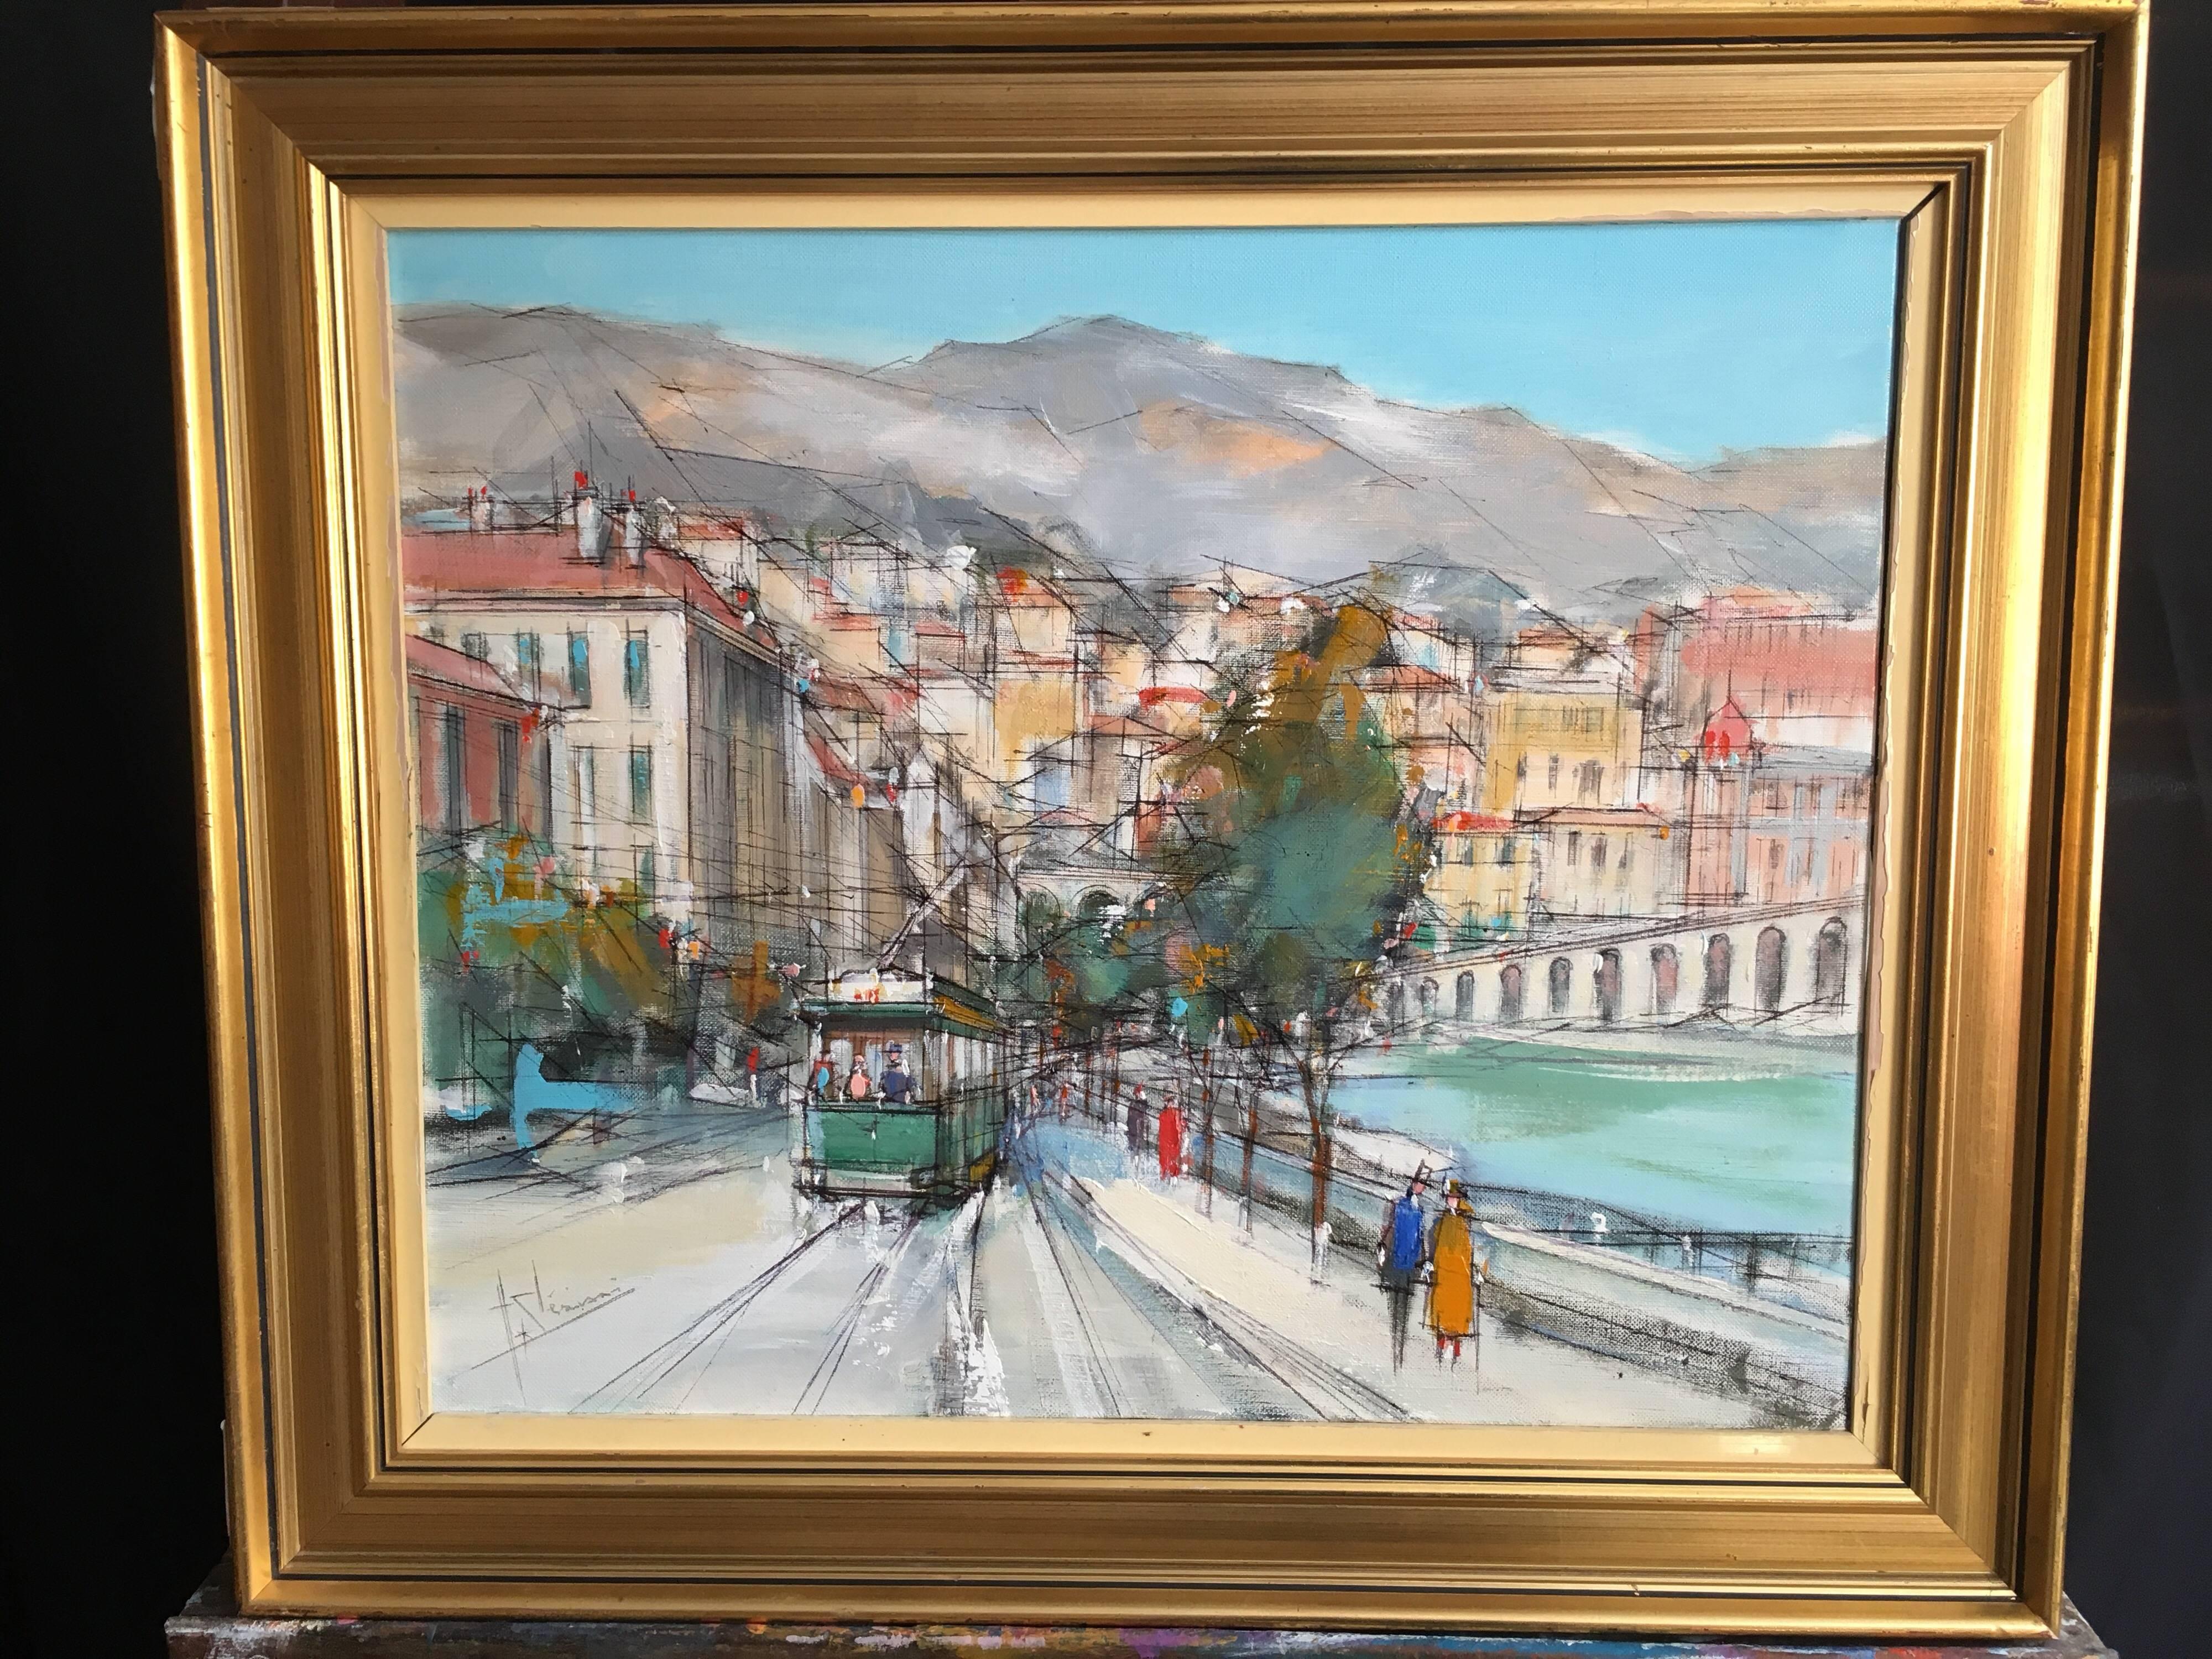 Architectural Landscape of Monte-Carlo Oil Painting, European City, Signed
French School, late Century
Signed by the artist on the lower left hand corner
Oil painting on canvas, framed
Frame size: 19.5 x 22.5 inches

Very stylish impressionist oil